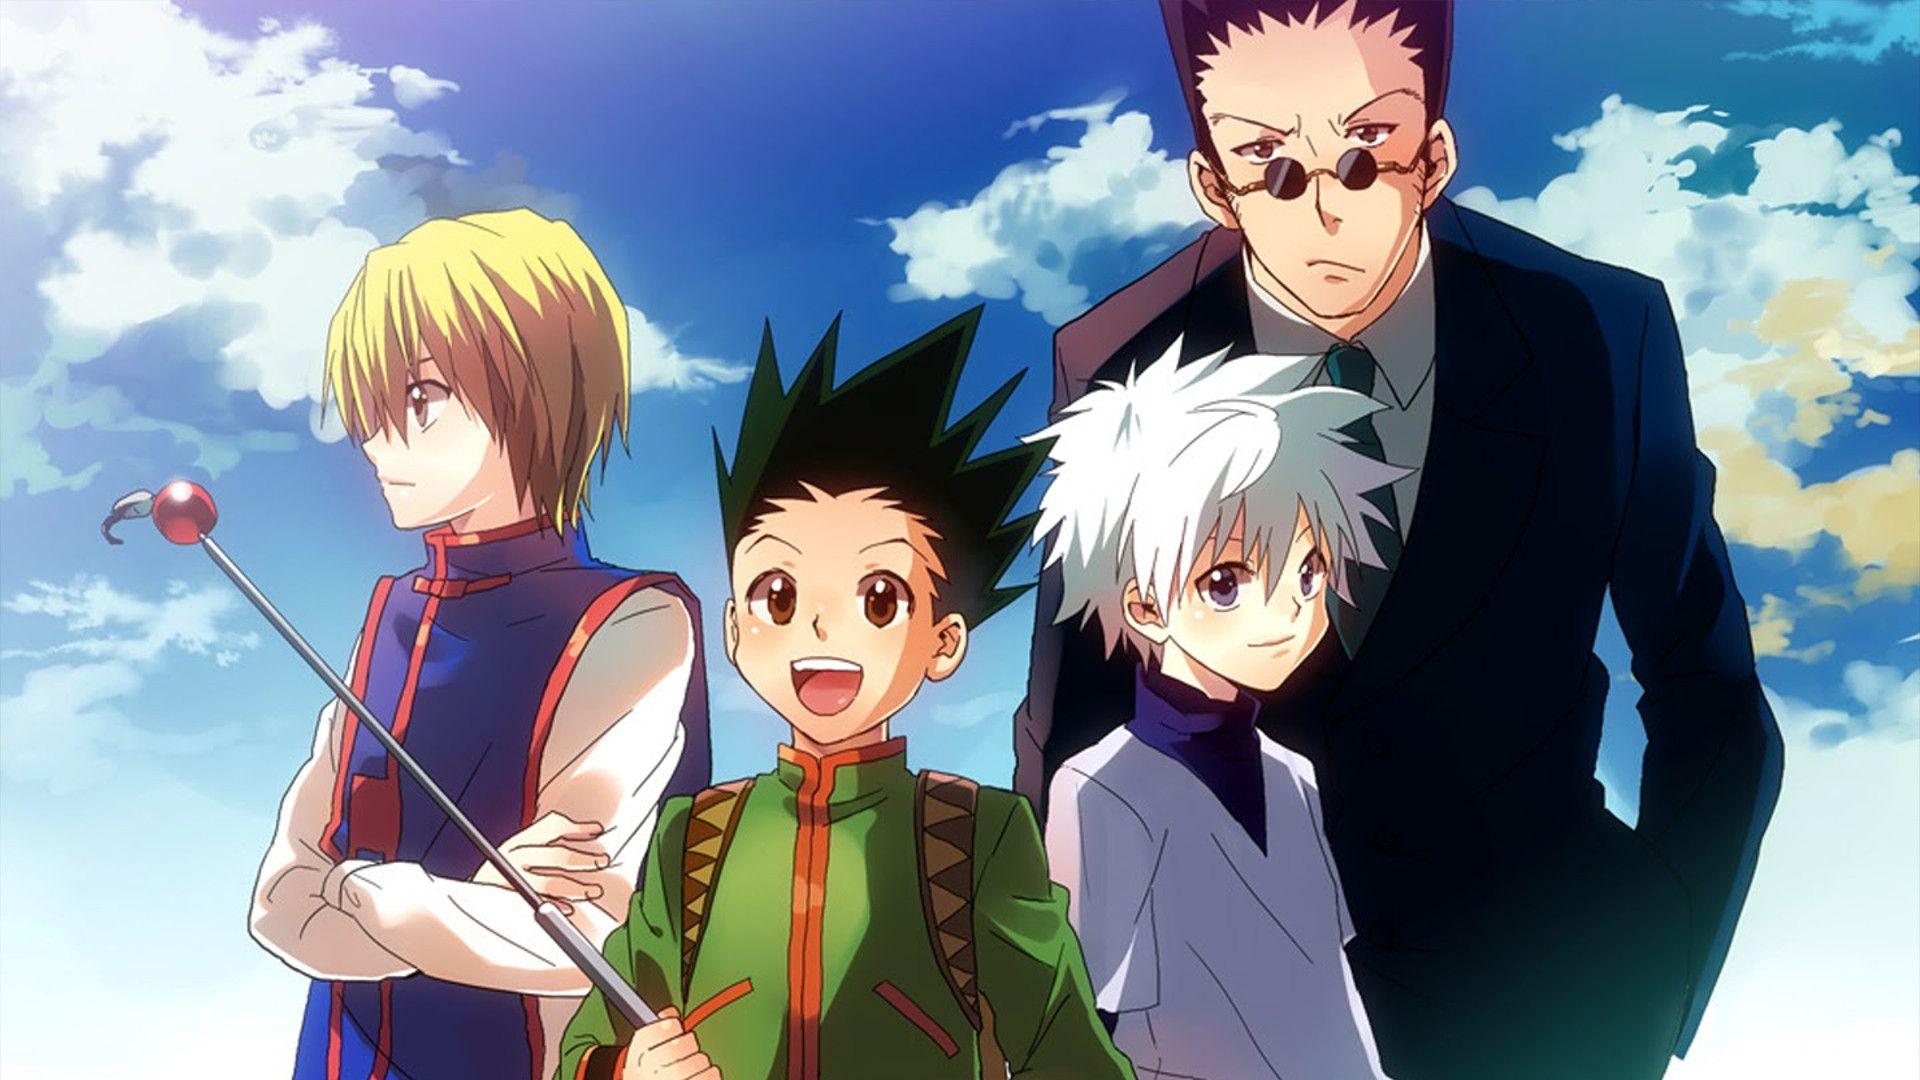 Hunter x Hunter Series Watch Order. Anime and Gaming Guides & Information